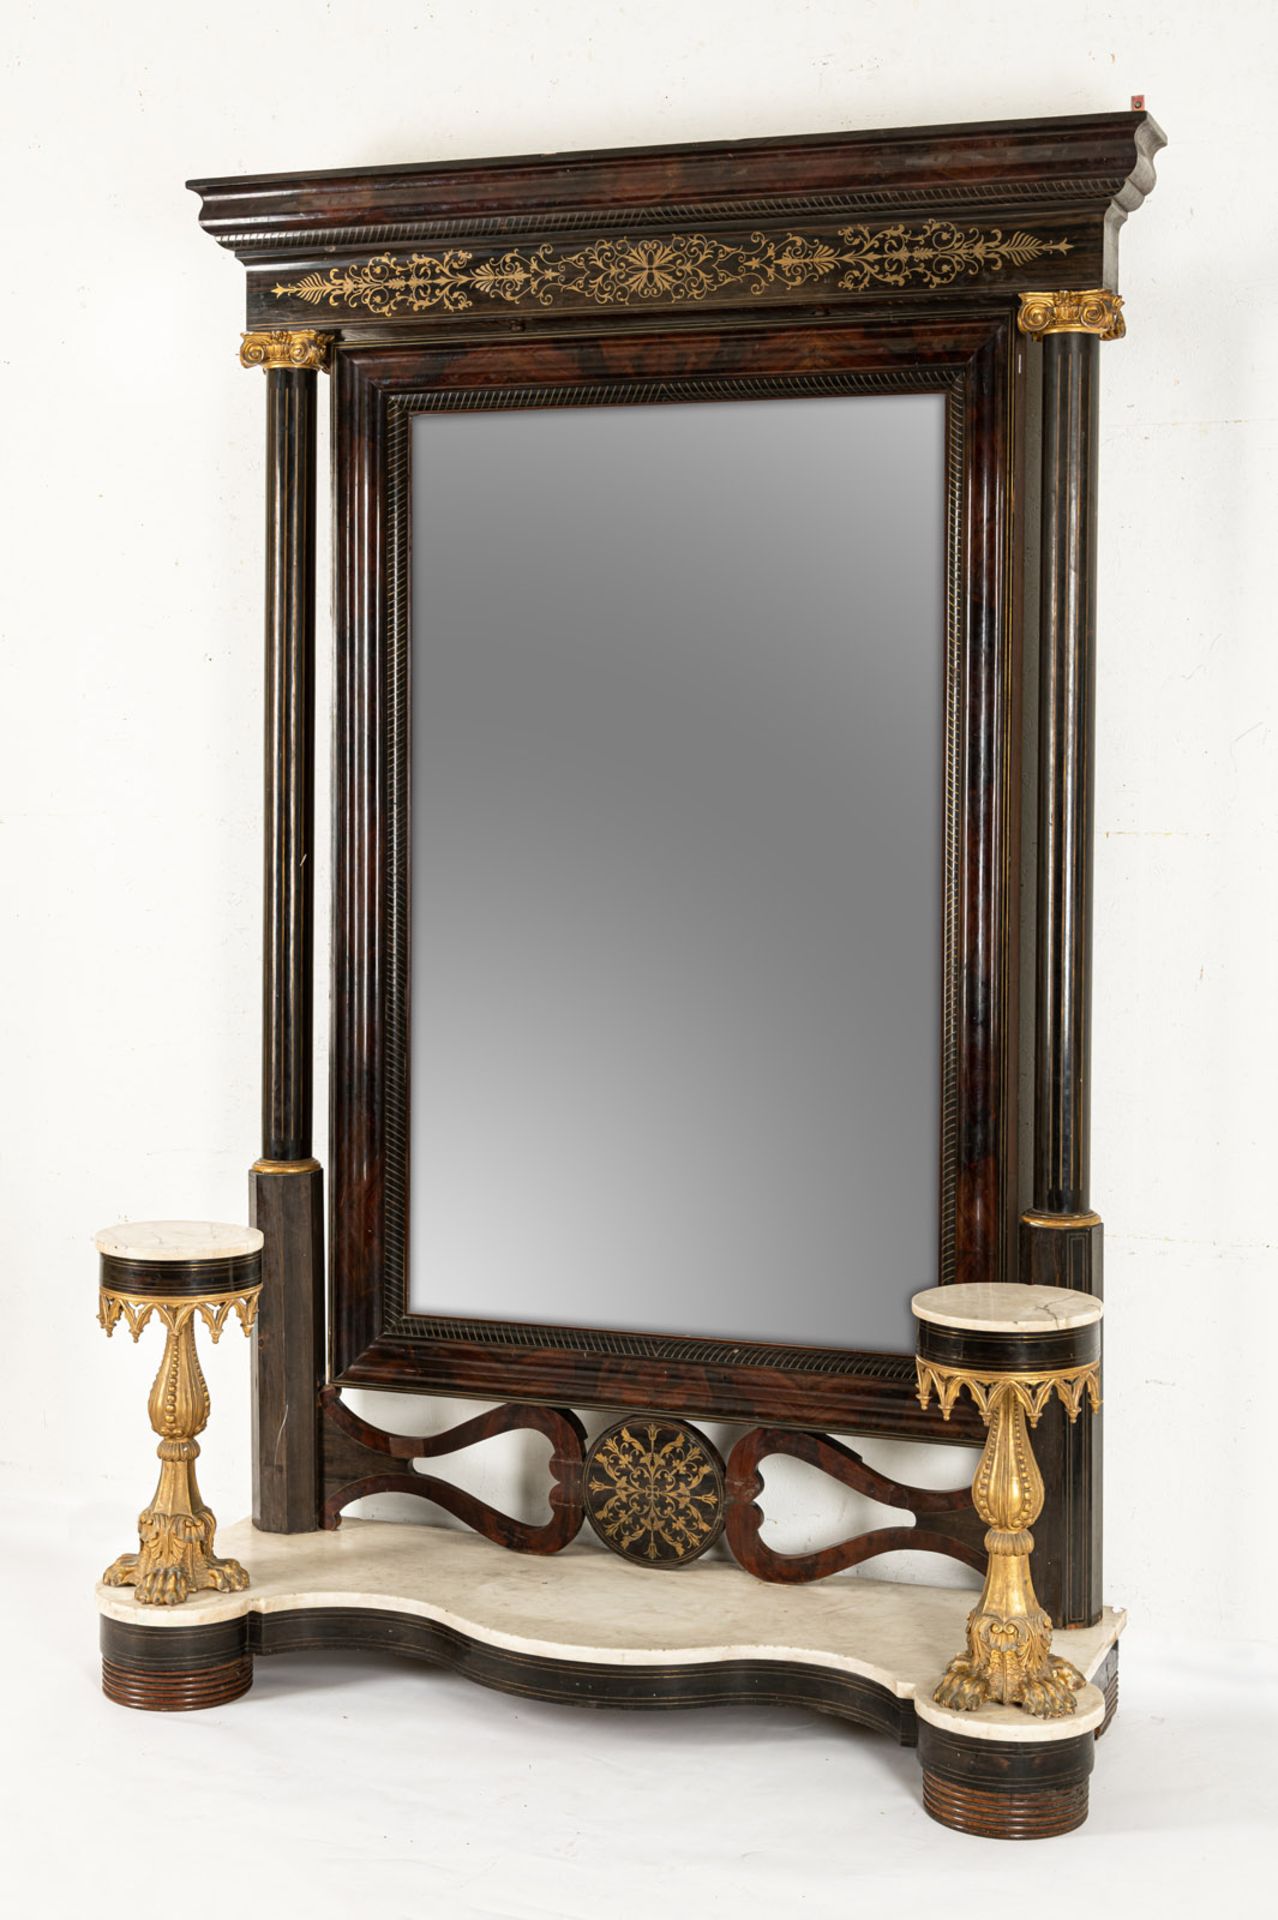 A MONUMENTAL CHARLES X MAHOGANY, EBONIZED AND BRASS INLAID CONSOLE MIRROR - Image 2 of 3